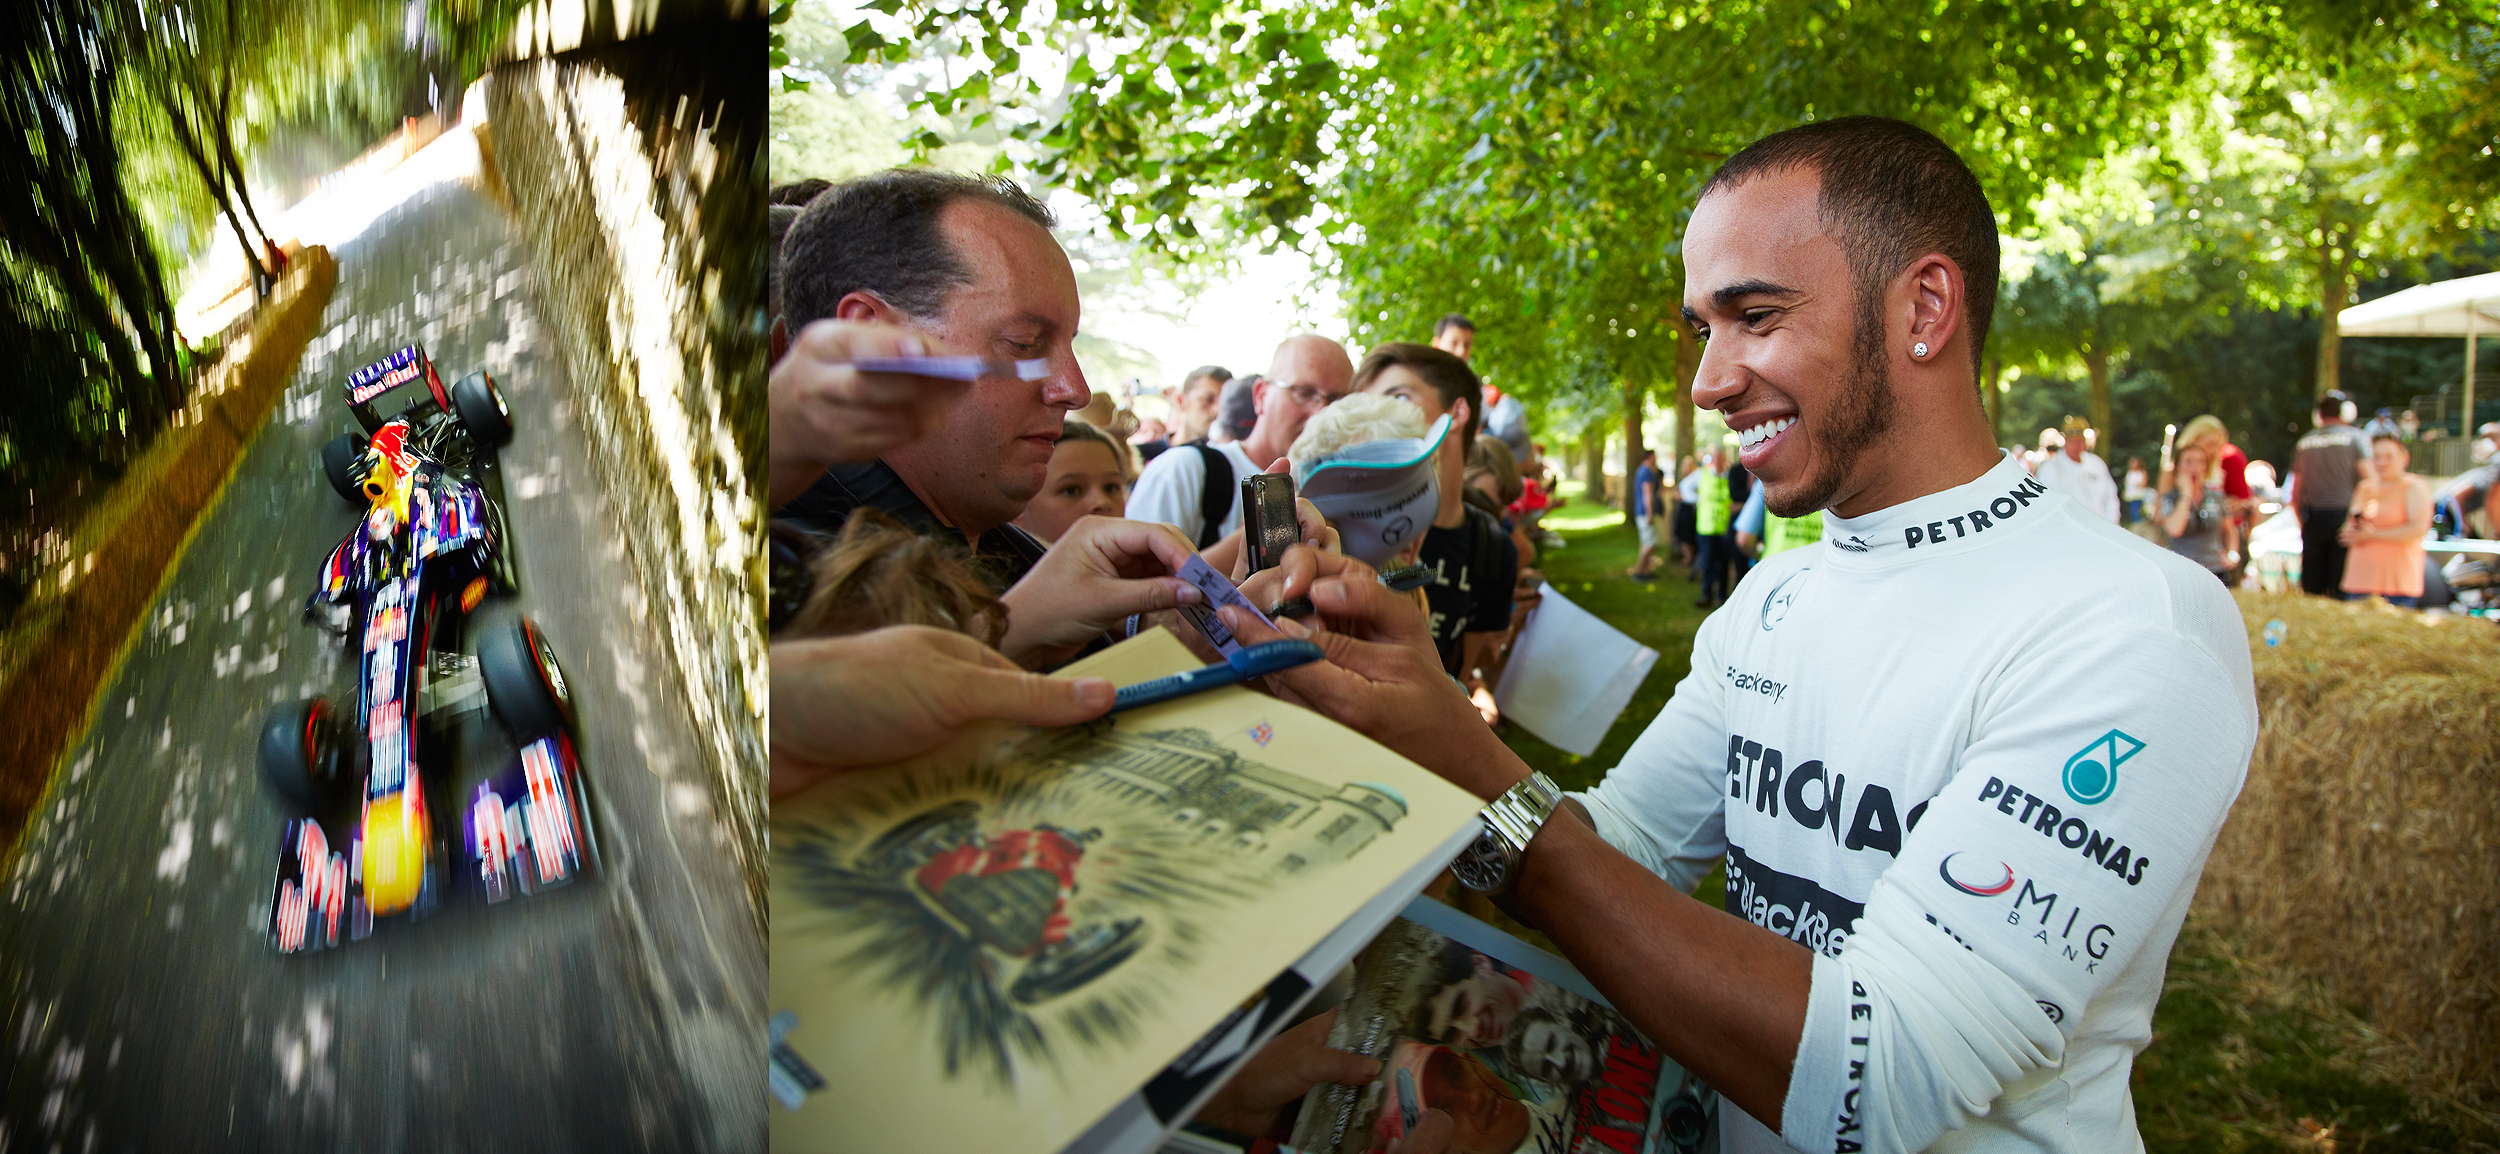 Lewis Hamilton at Goodwood Festival of Speed, UK.  Travel photography by Mike Caldwell